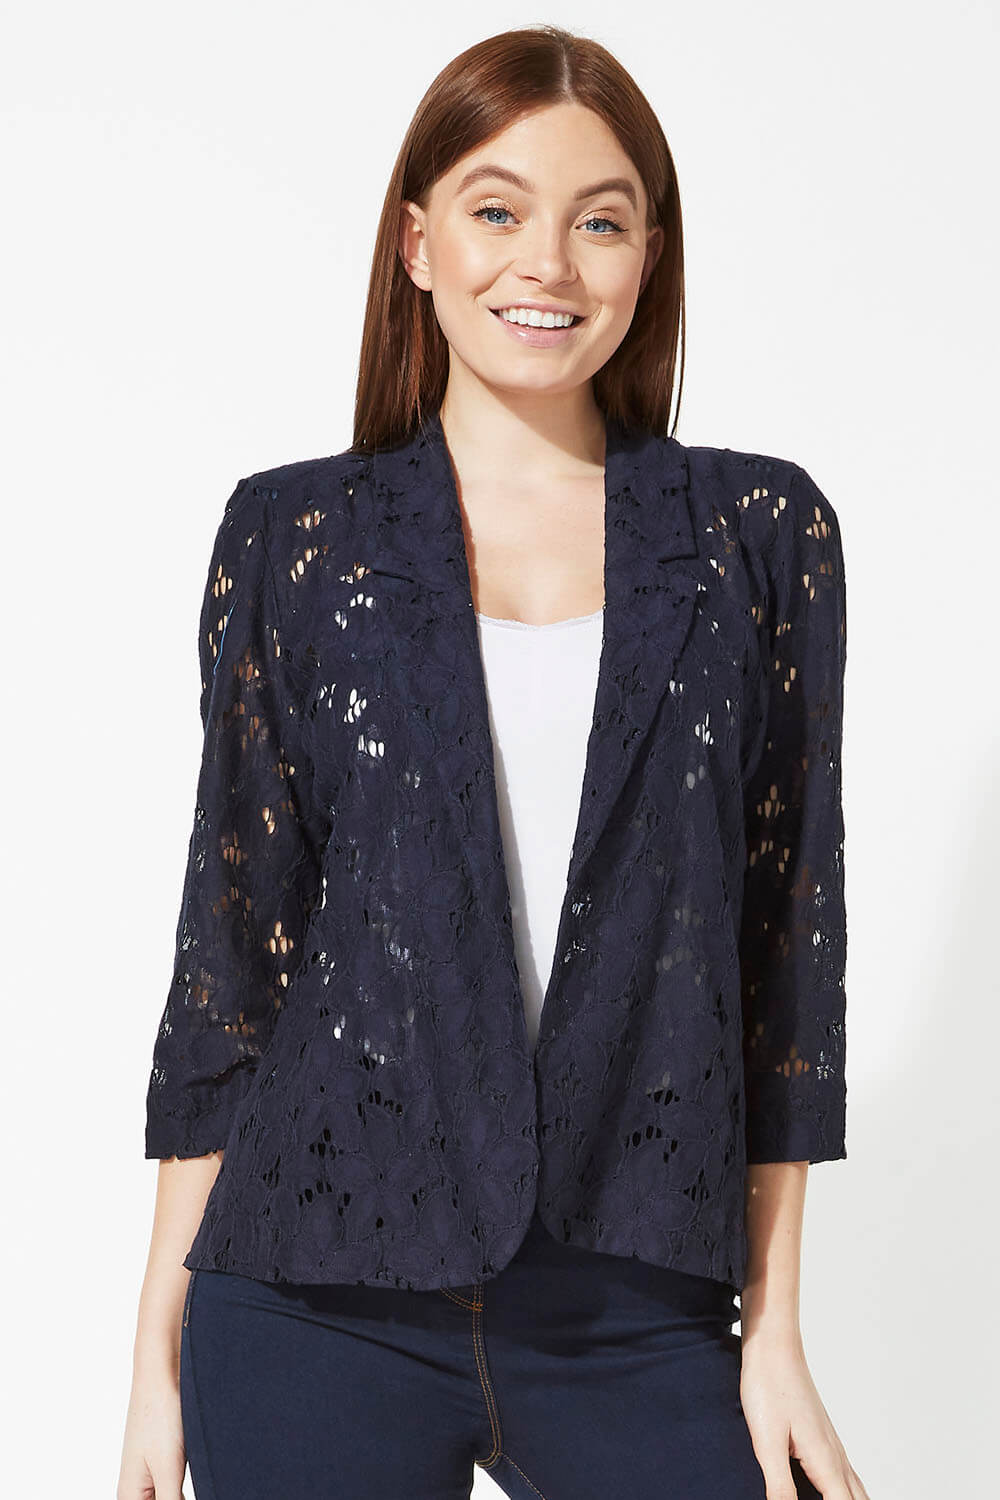 Navy  Floral Lace 3/4 Sleeve Jacket, Image 2 of 4